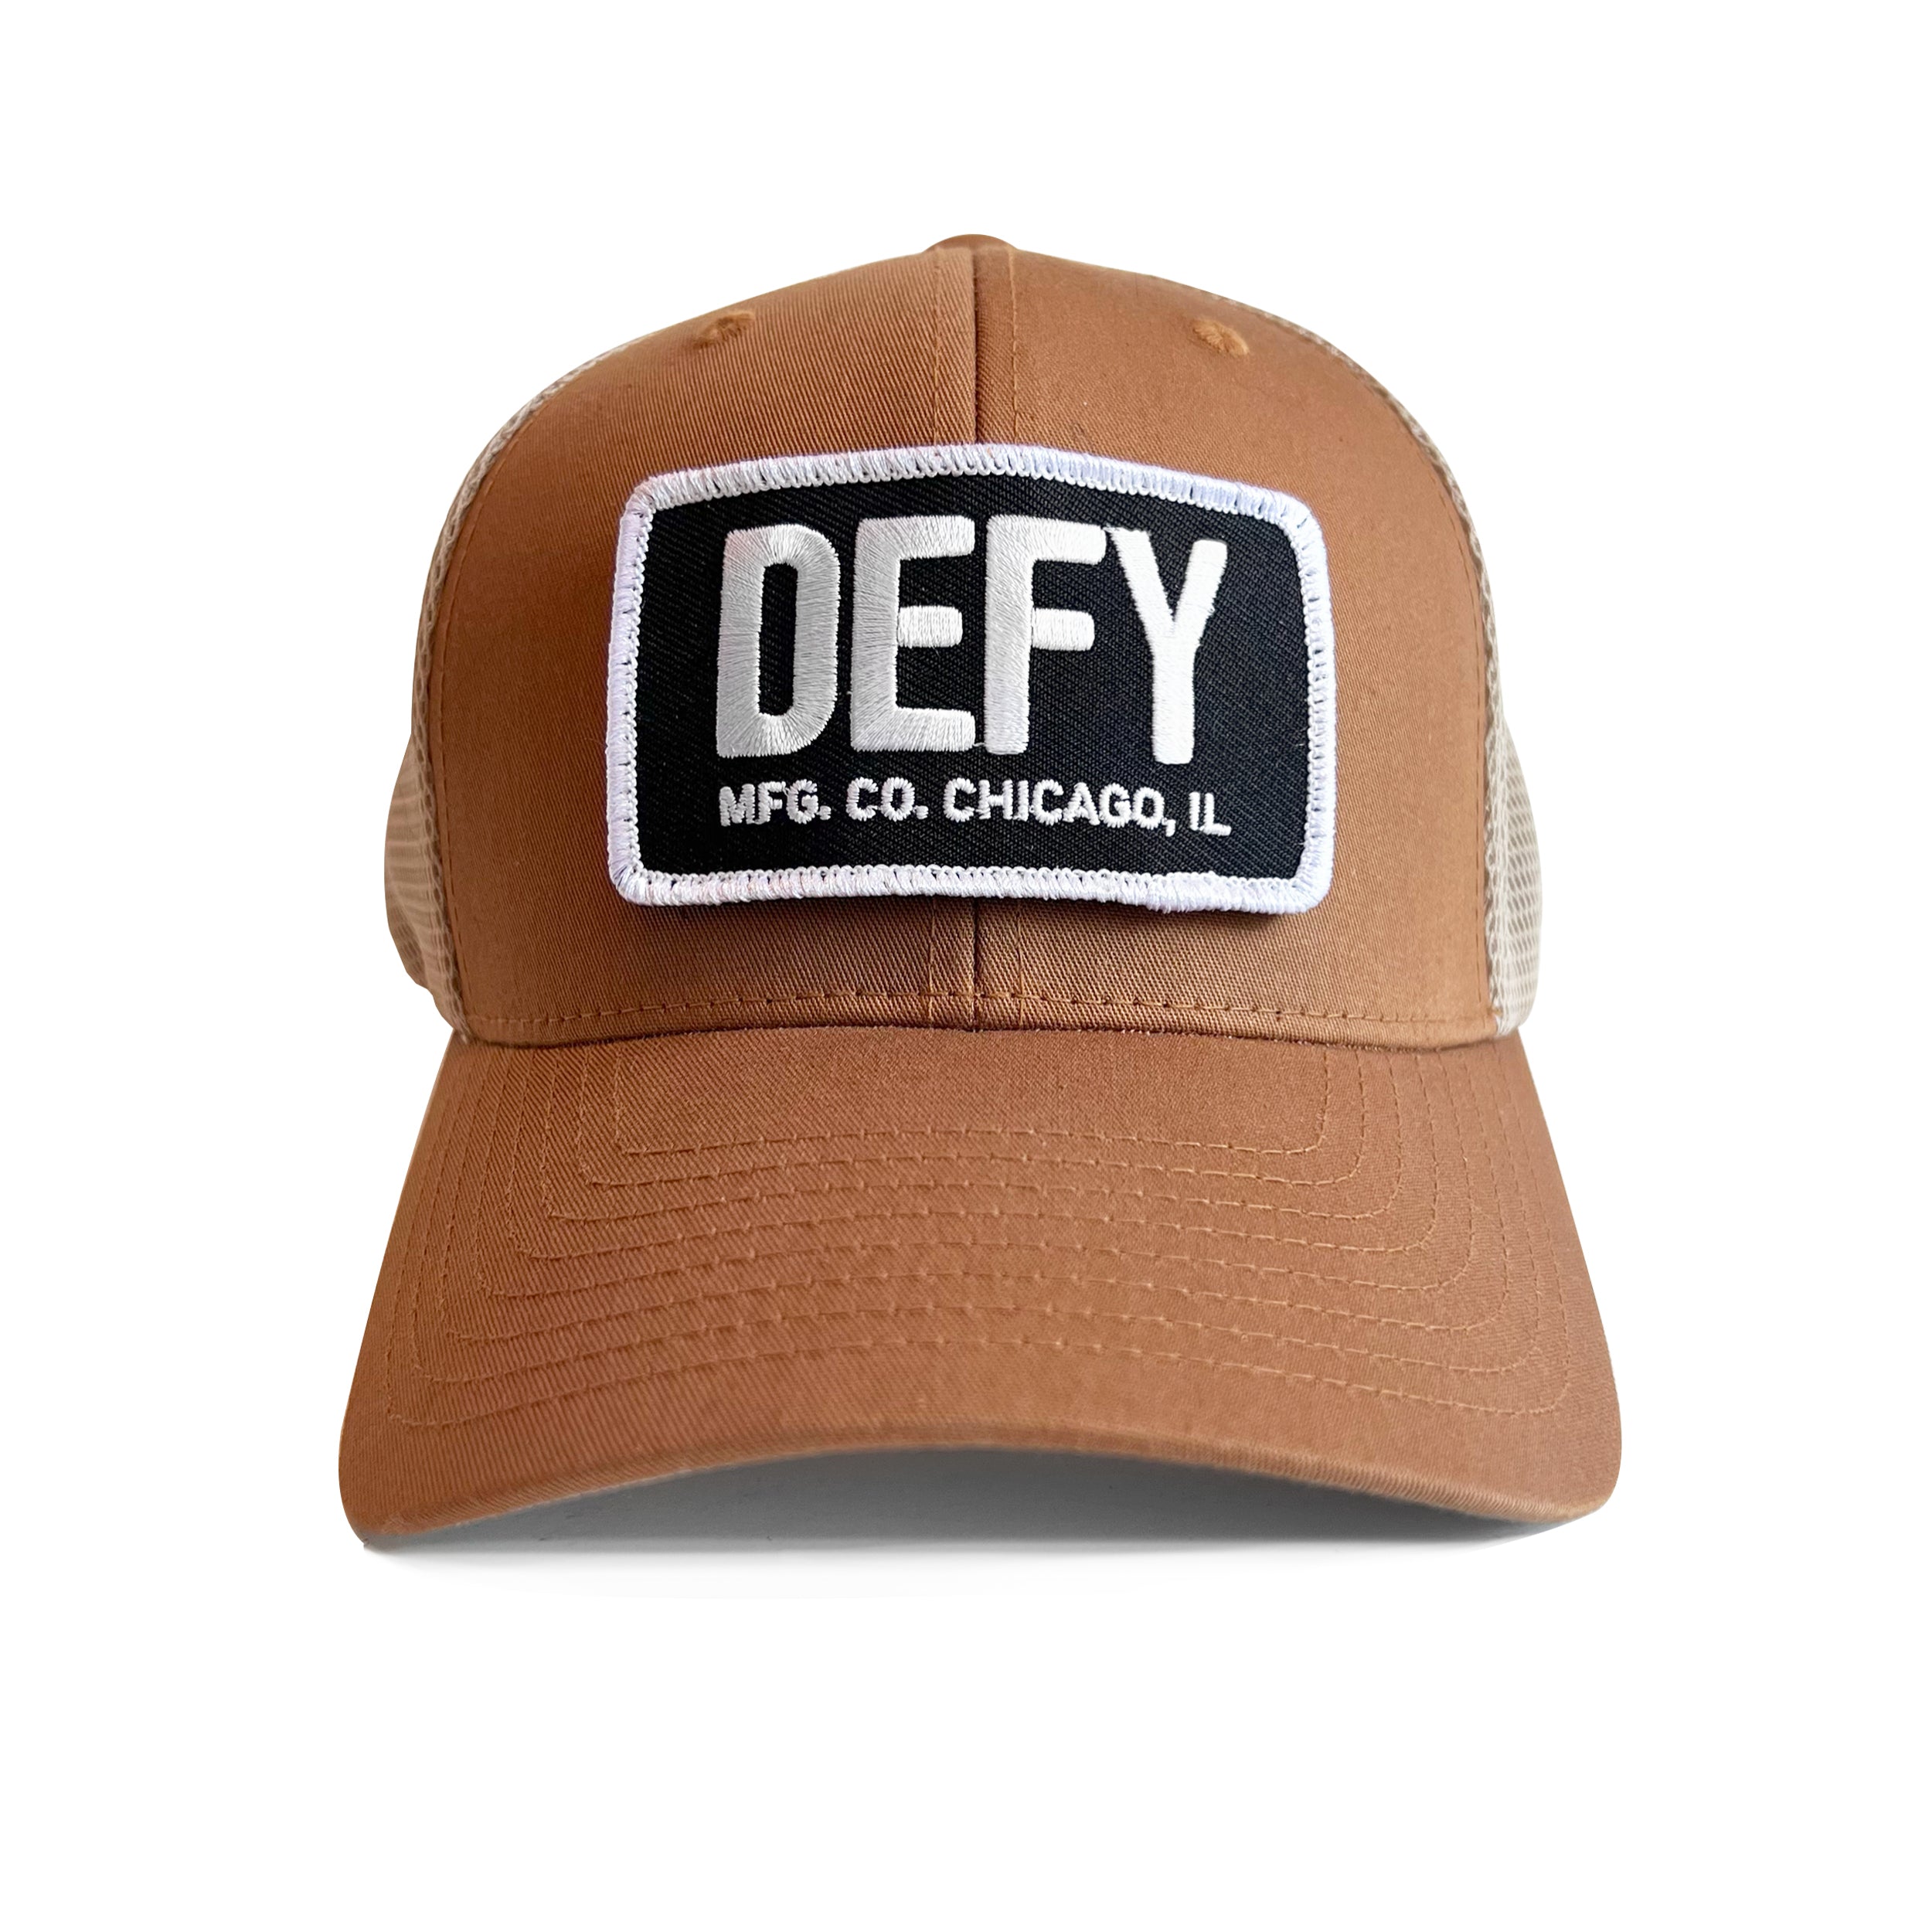  The Hat Pros Coyote Brown Flexfit Fitted Hat